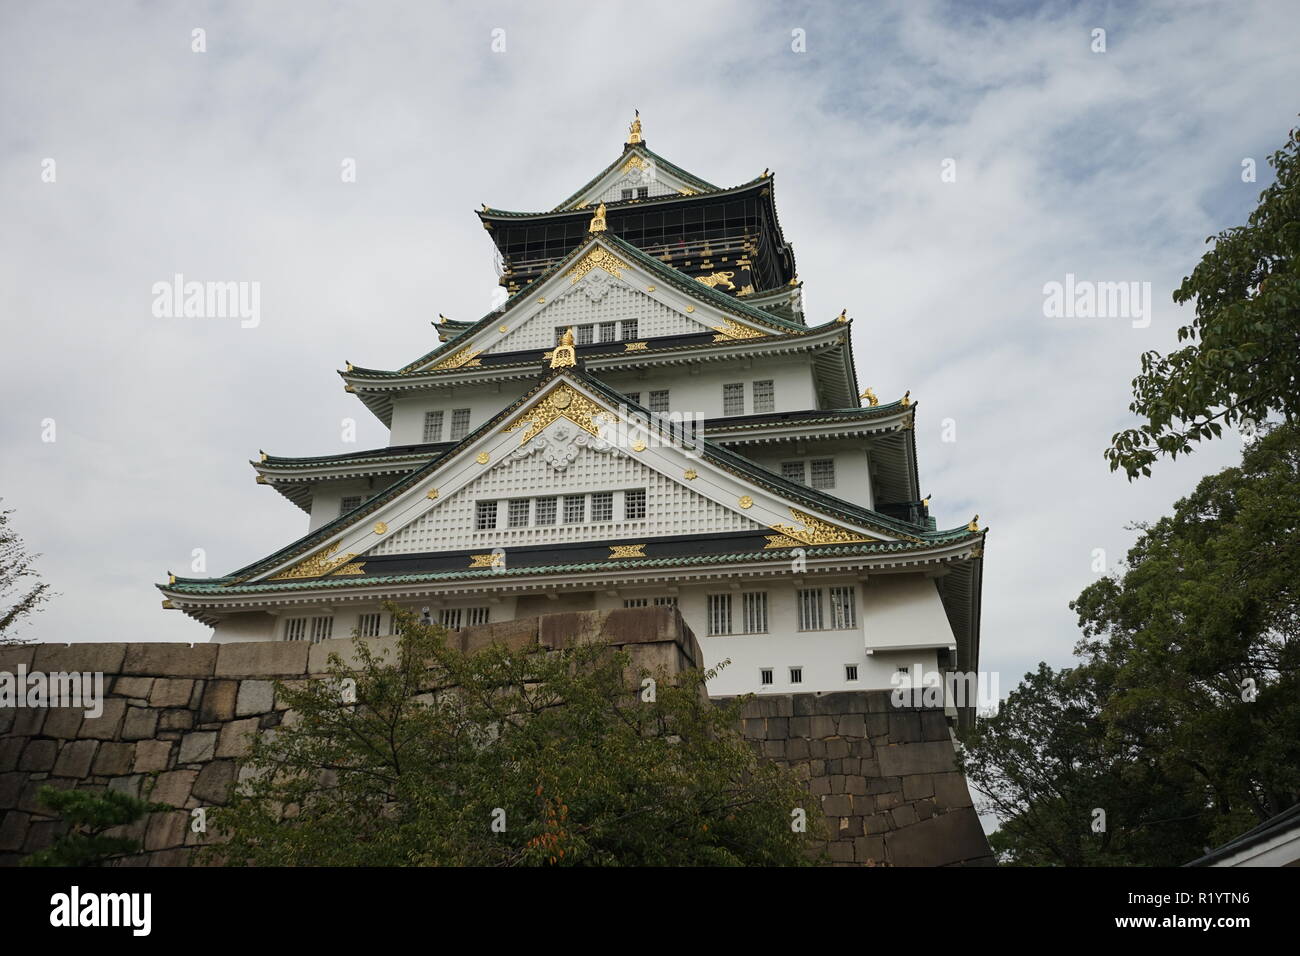 Osaka Castle is one of Japan's most famous landmarks and it played a major role in the unification of Japan during the 16th century. Stock Photo